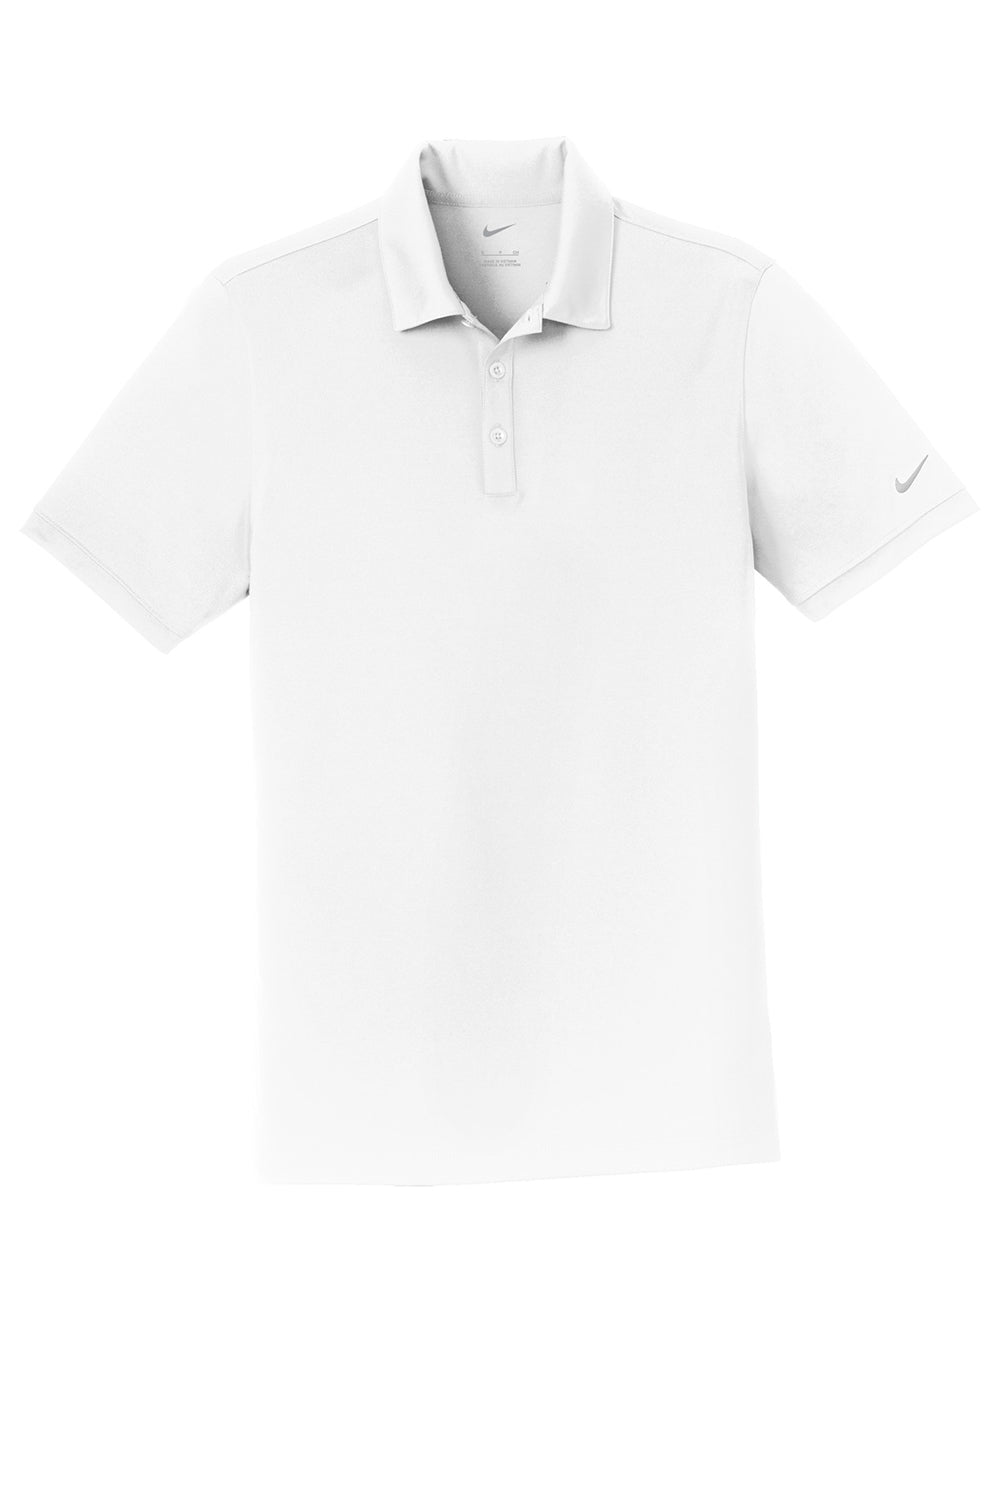 Nike 799802 Mens Players Dri-Fit Moisture Wicking Short Sleeve Polo Shirt White Flat Front